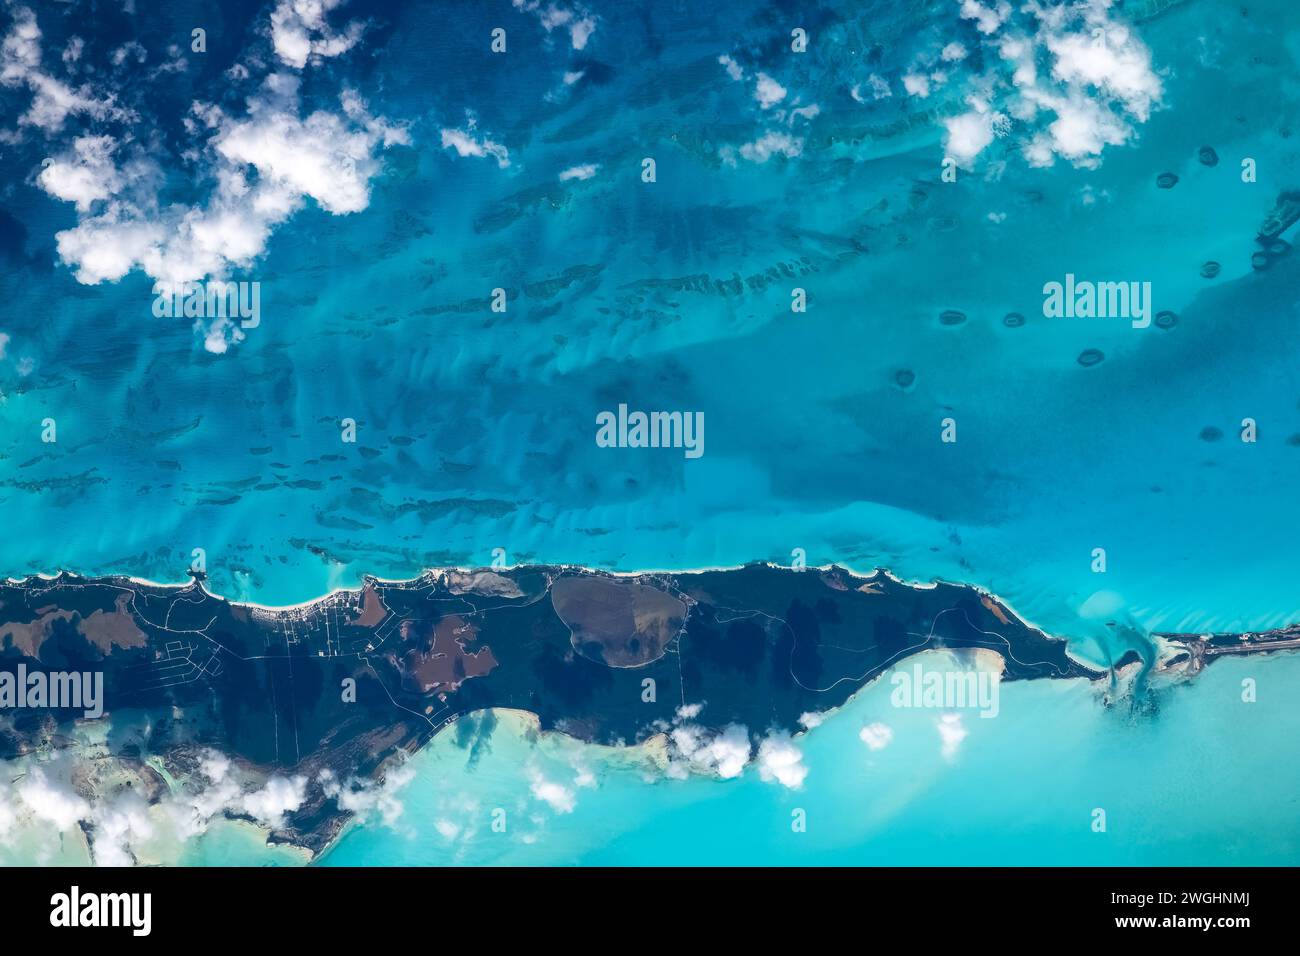 Turquoise sea water and coastline in the Bahamas. Digital enhancemet of an image by NASA Stock Photo